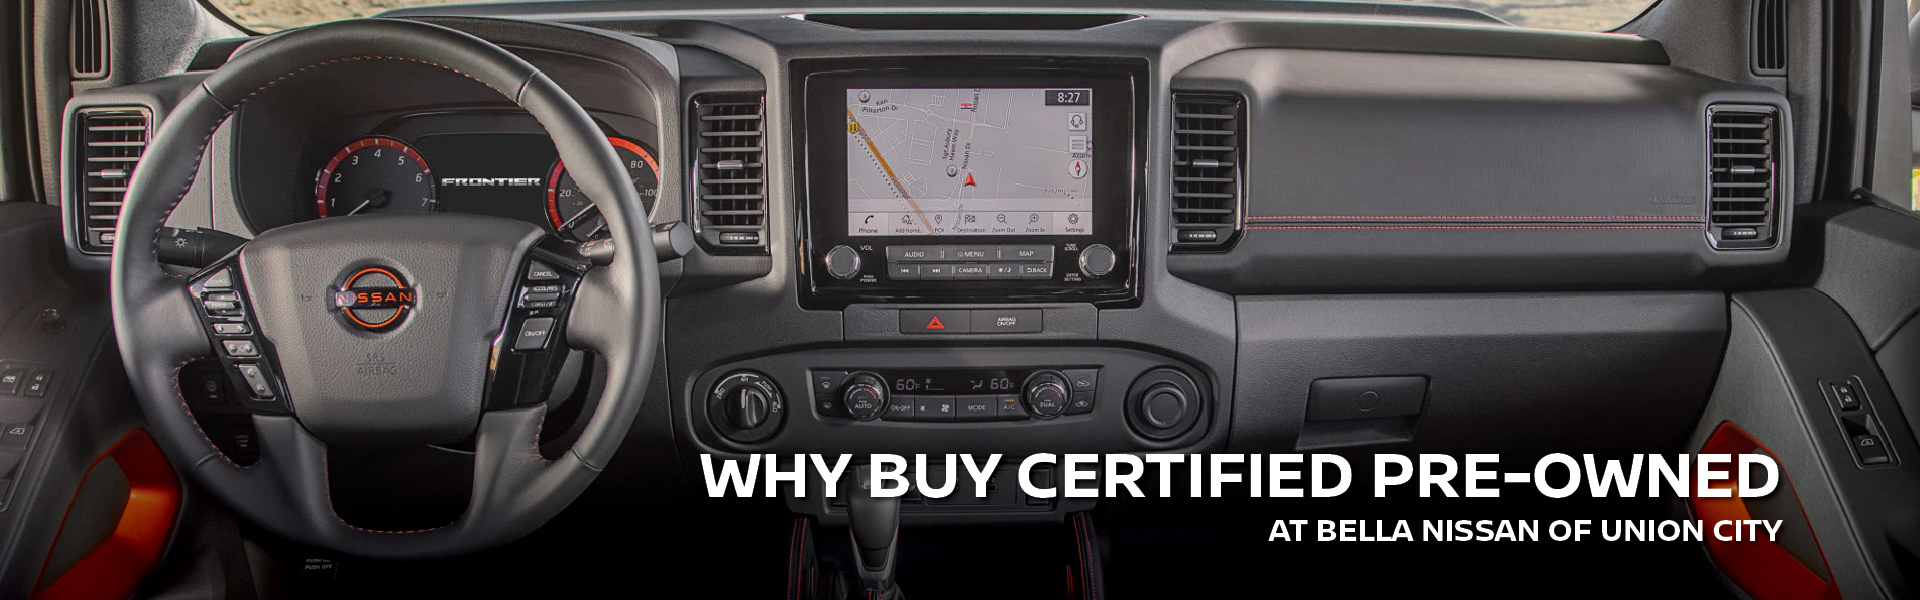 Why Buy Certified Pre-Owned